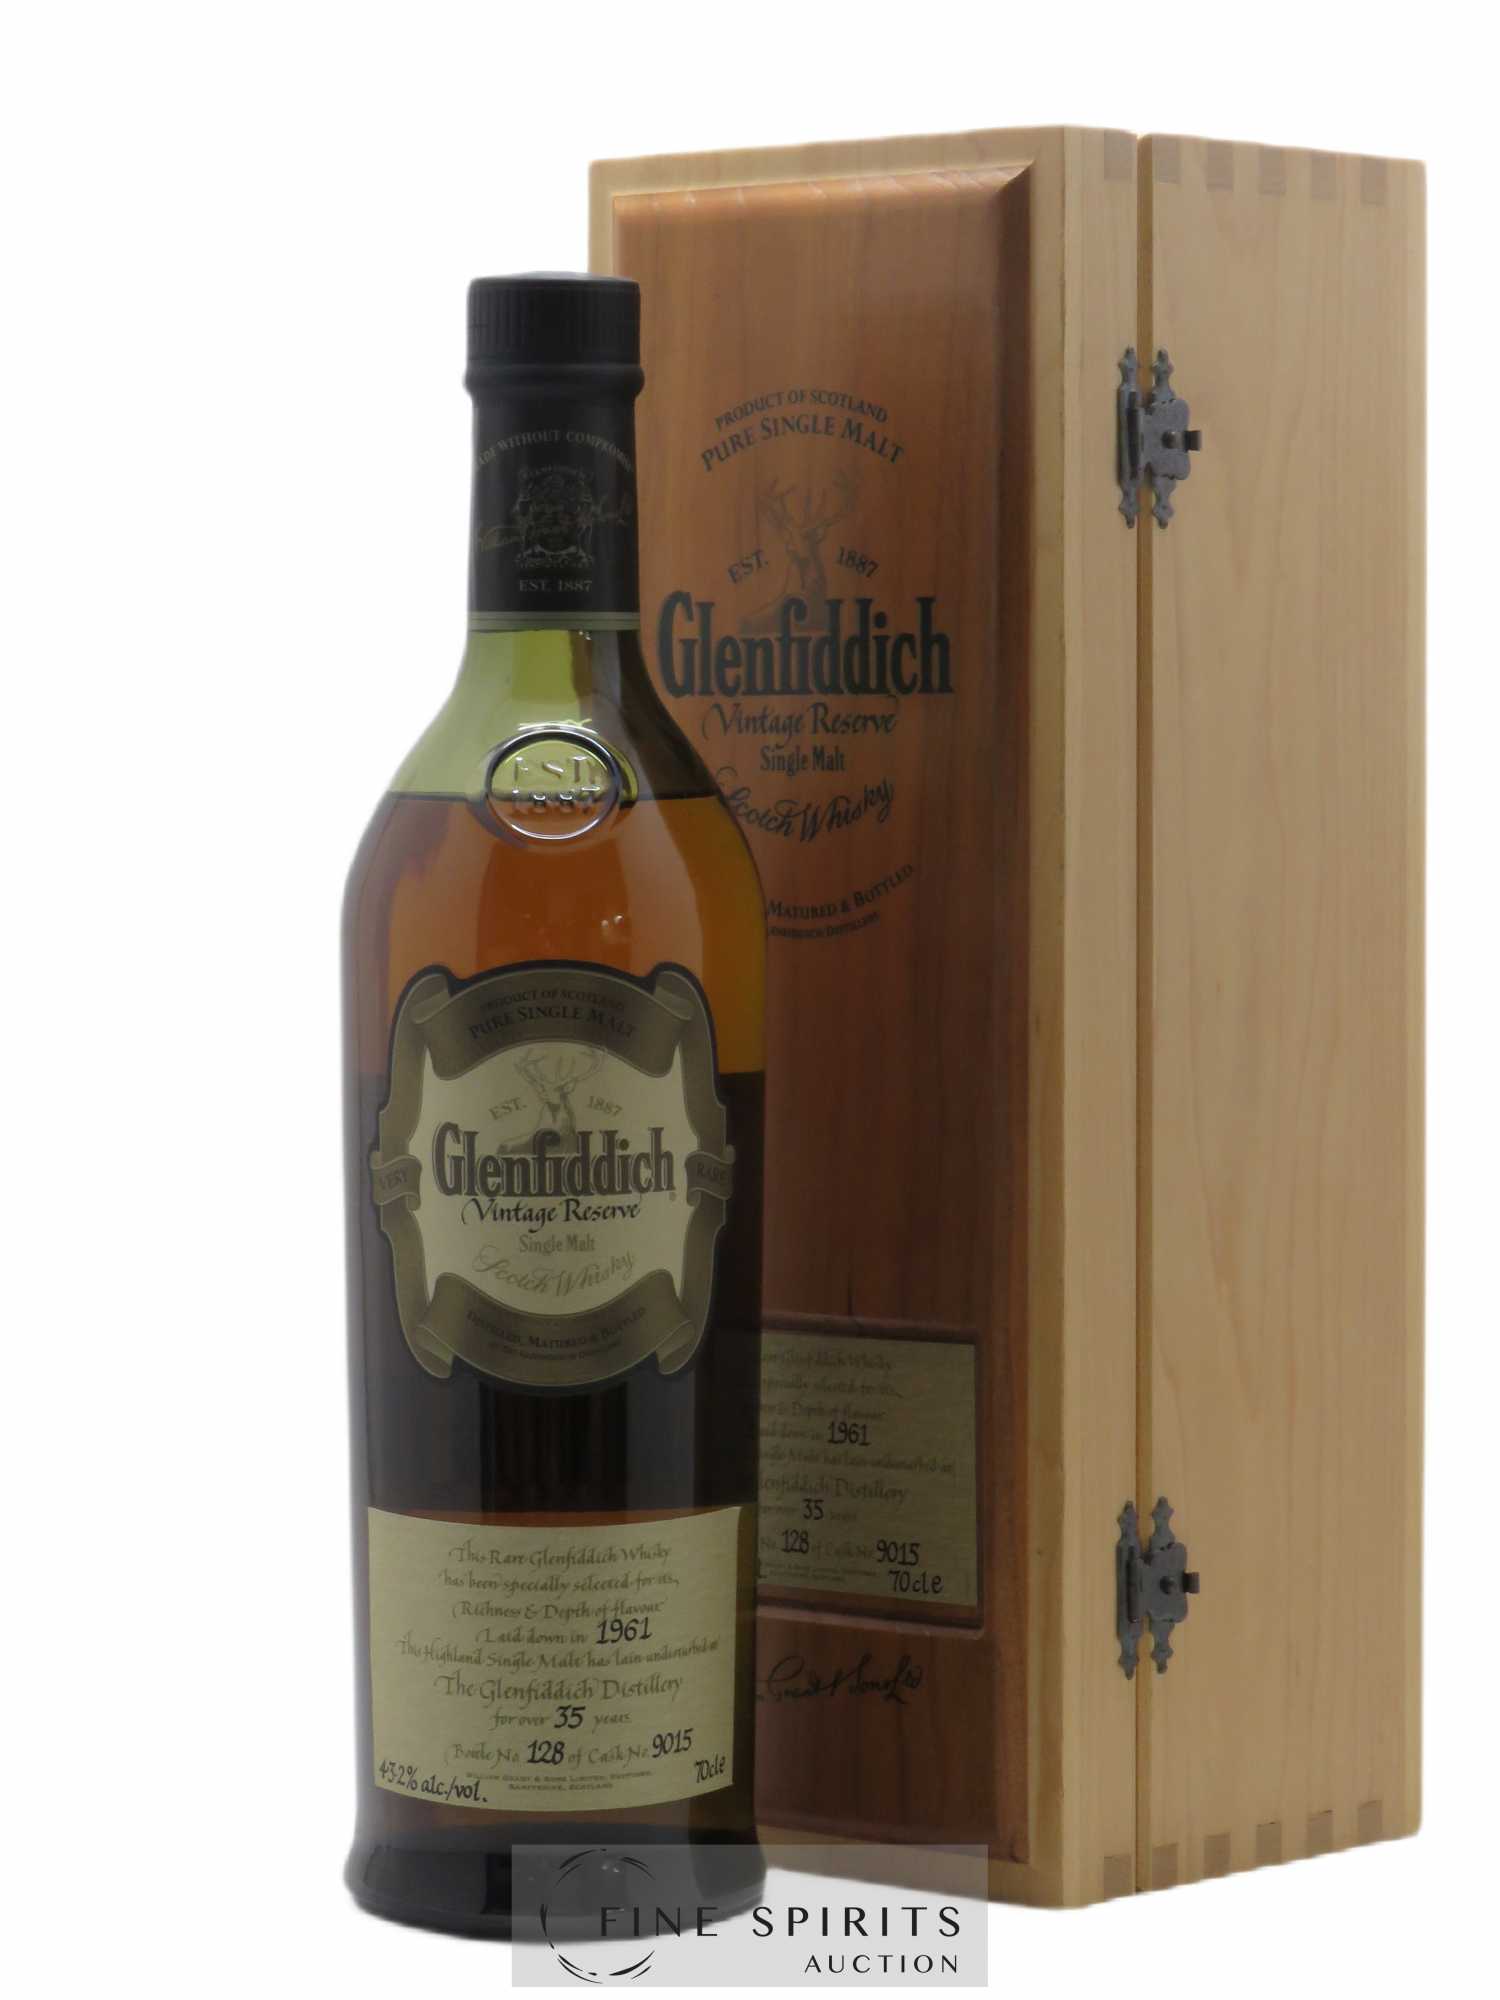 Glenfiddich 35 years 1961 Of. Vintage Reserve Cask n°9015 Very Rare 